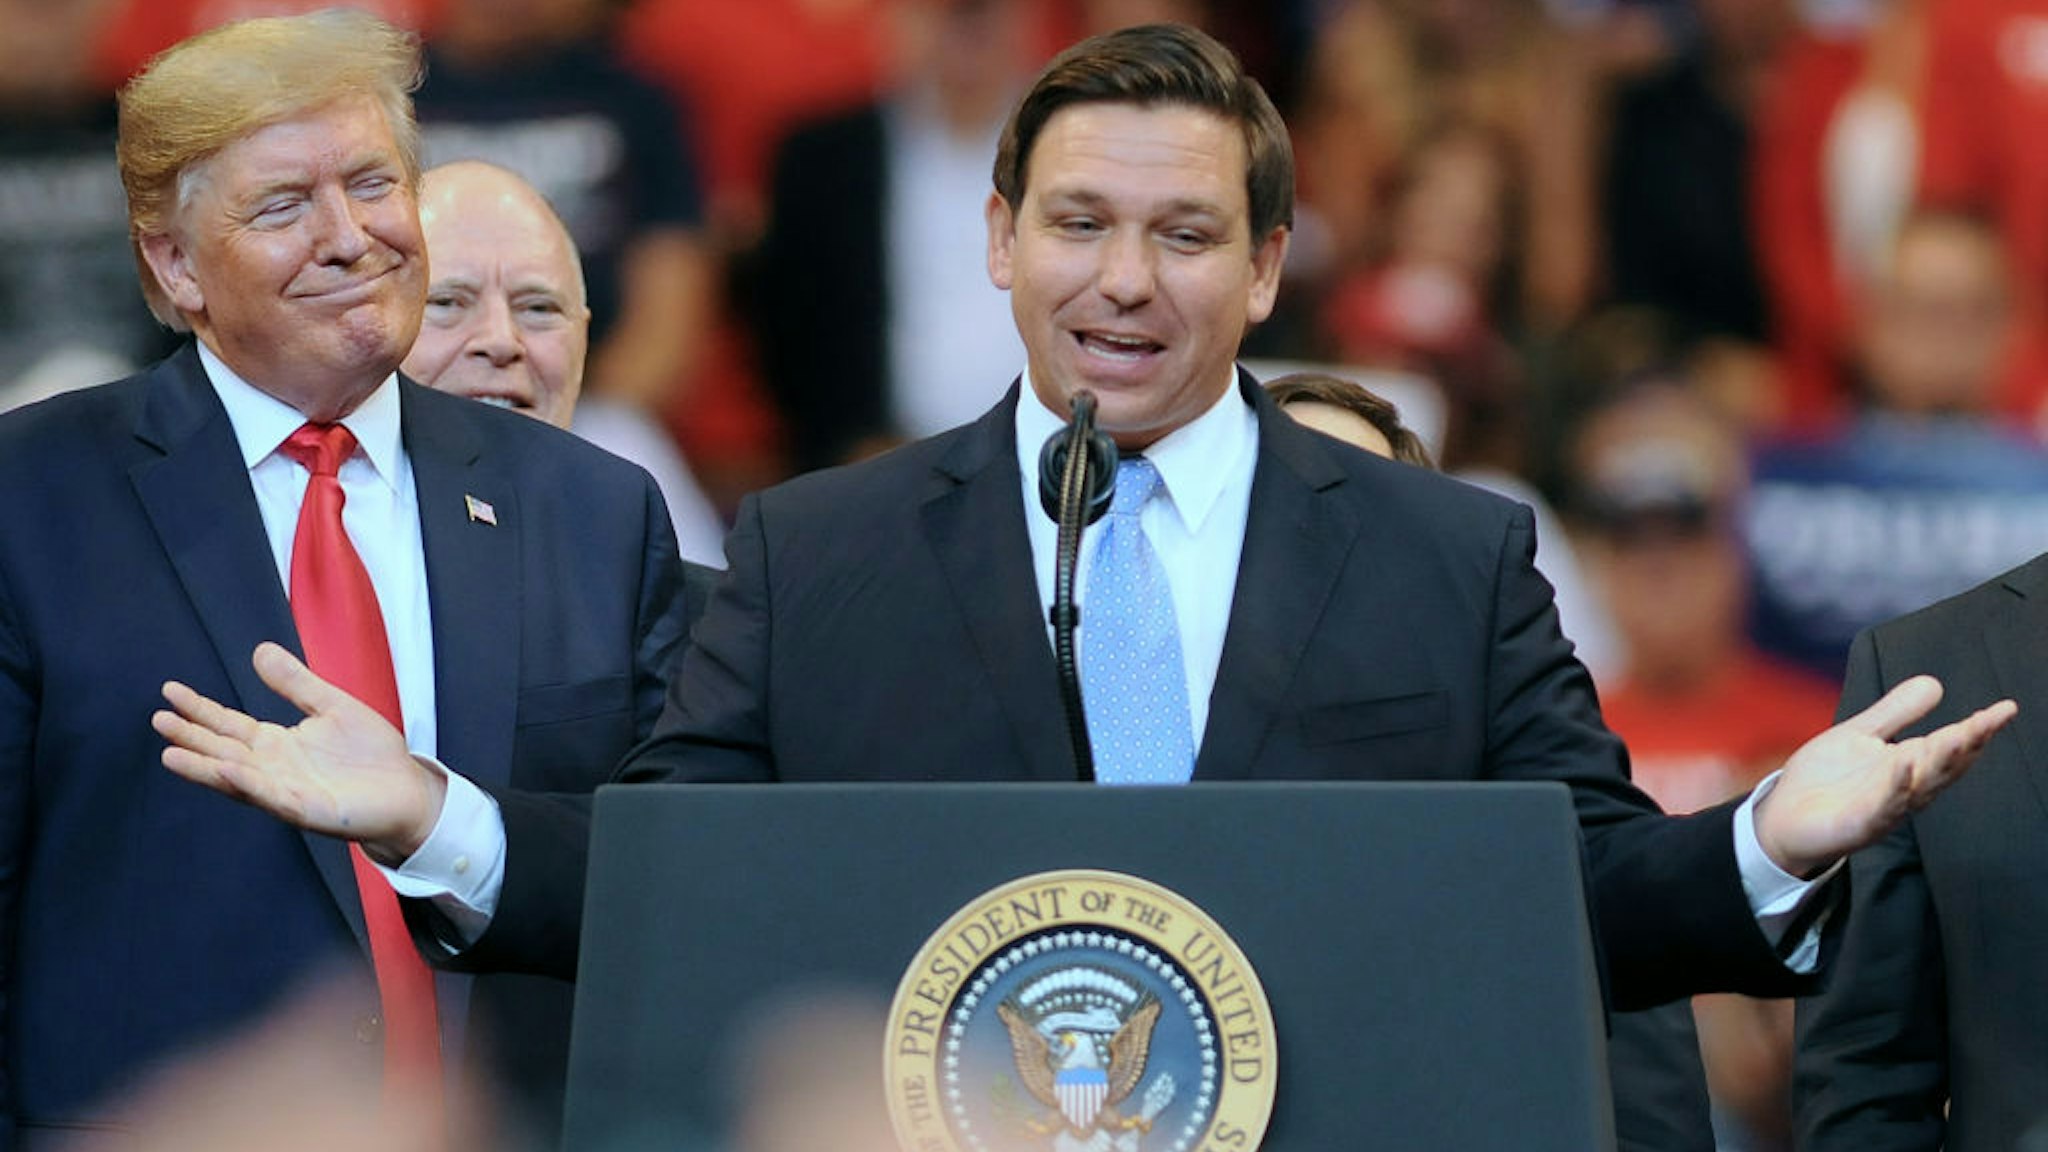 President Donald Trump looks on as Florida Governor Ron DeSantis speaks during the Florida Homecoming rally at the BB&amp;T Center.